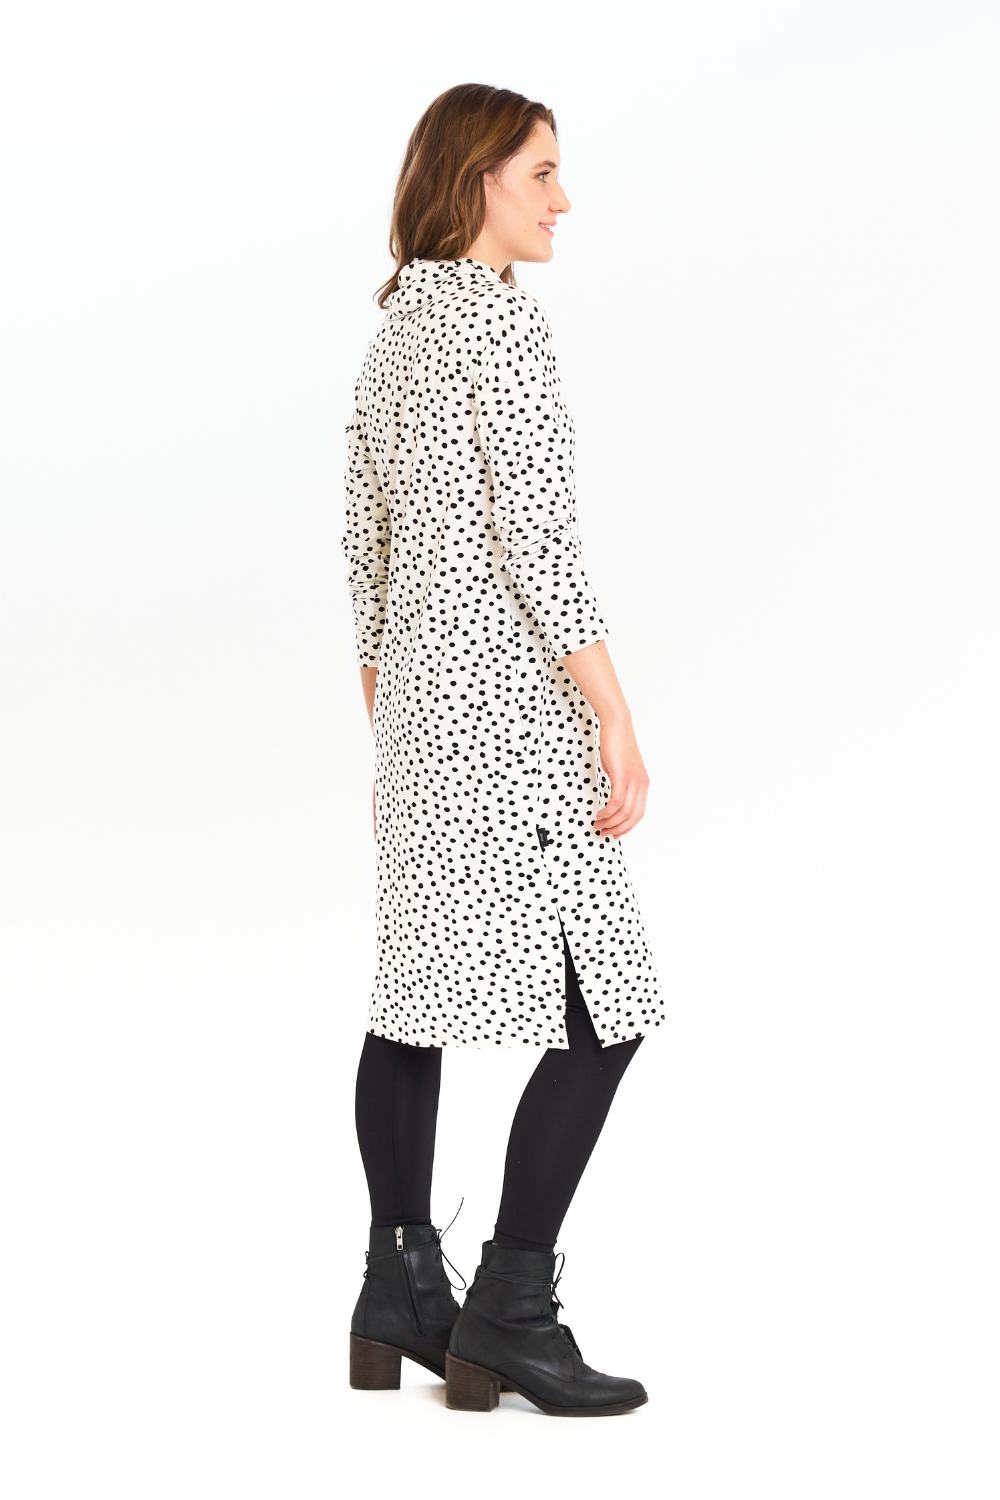 Mimi Midi Dress by EMK, Black and White, polka dots, cowl neck, long sleeves, midi-length, side slits, side pockets, eco-fabric, bamboo rayon, cotton, sizes S-XL, made in Winnipeg